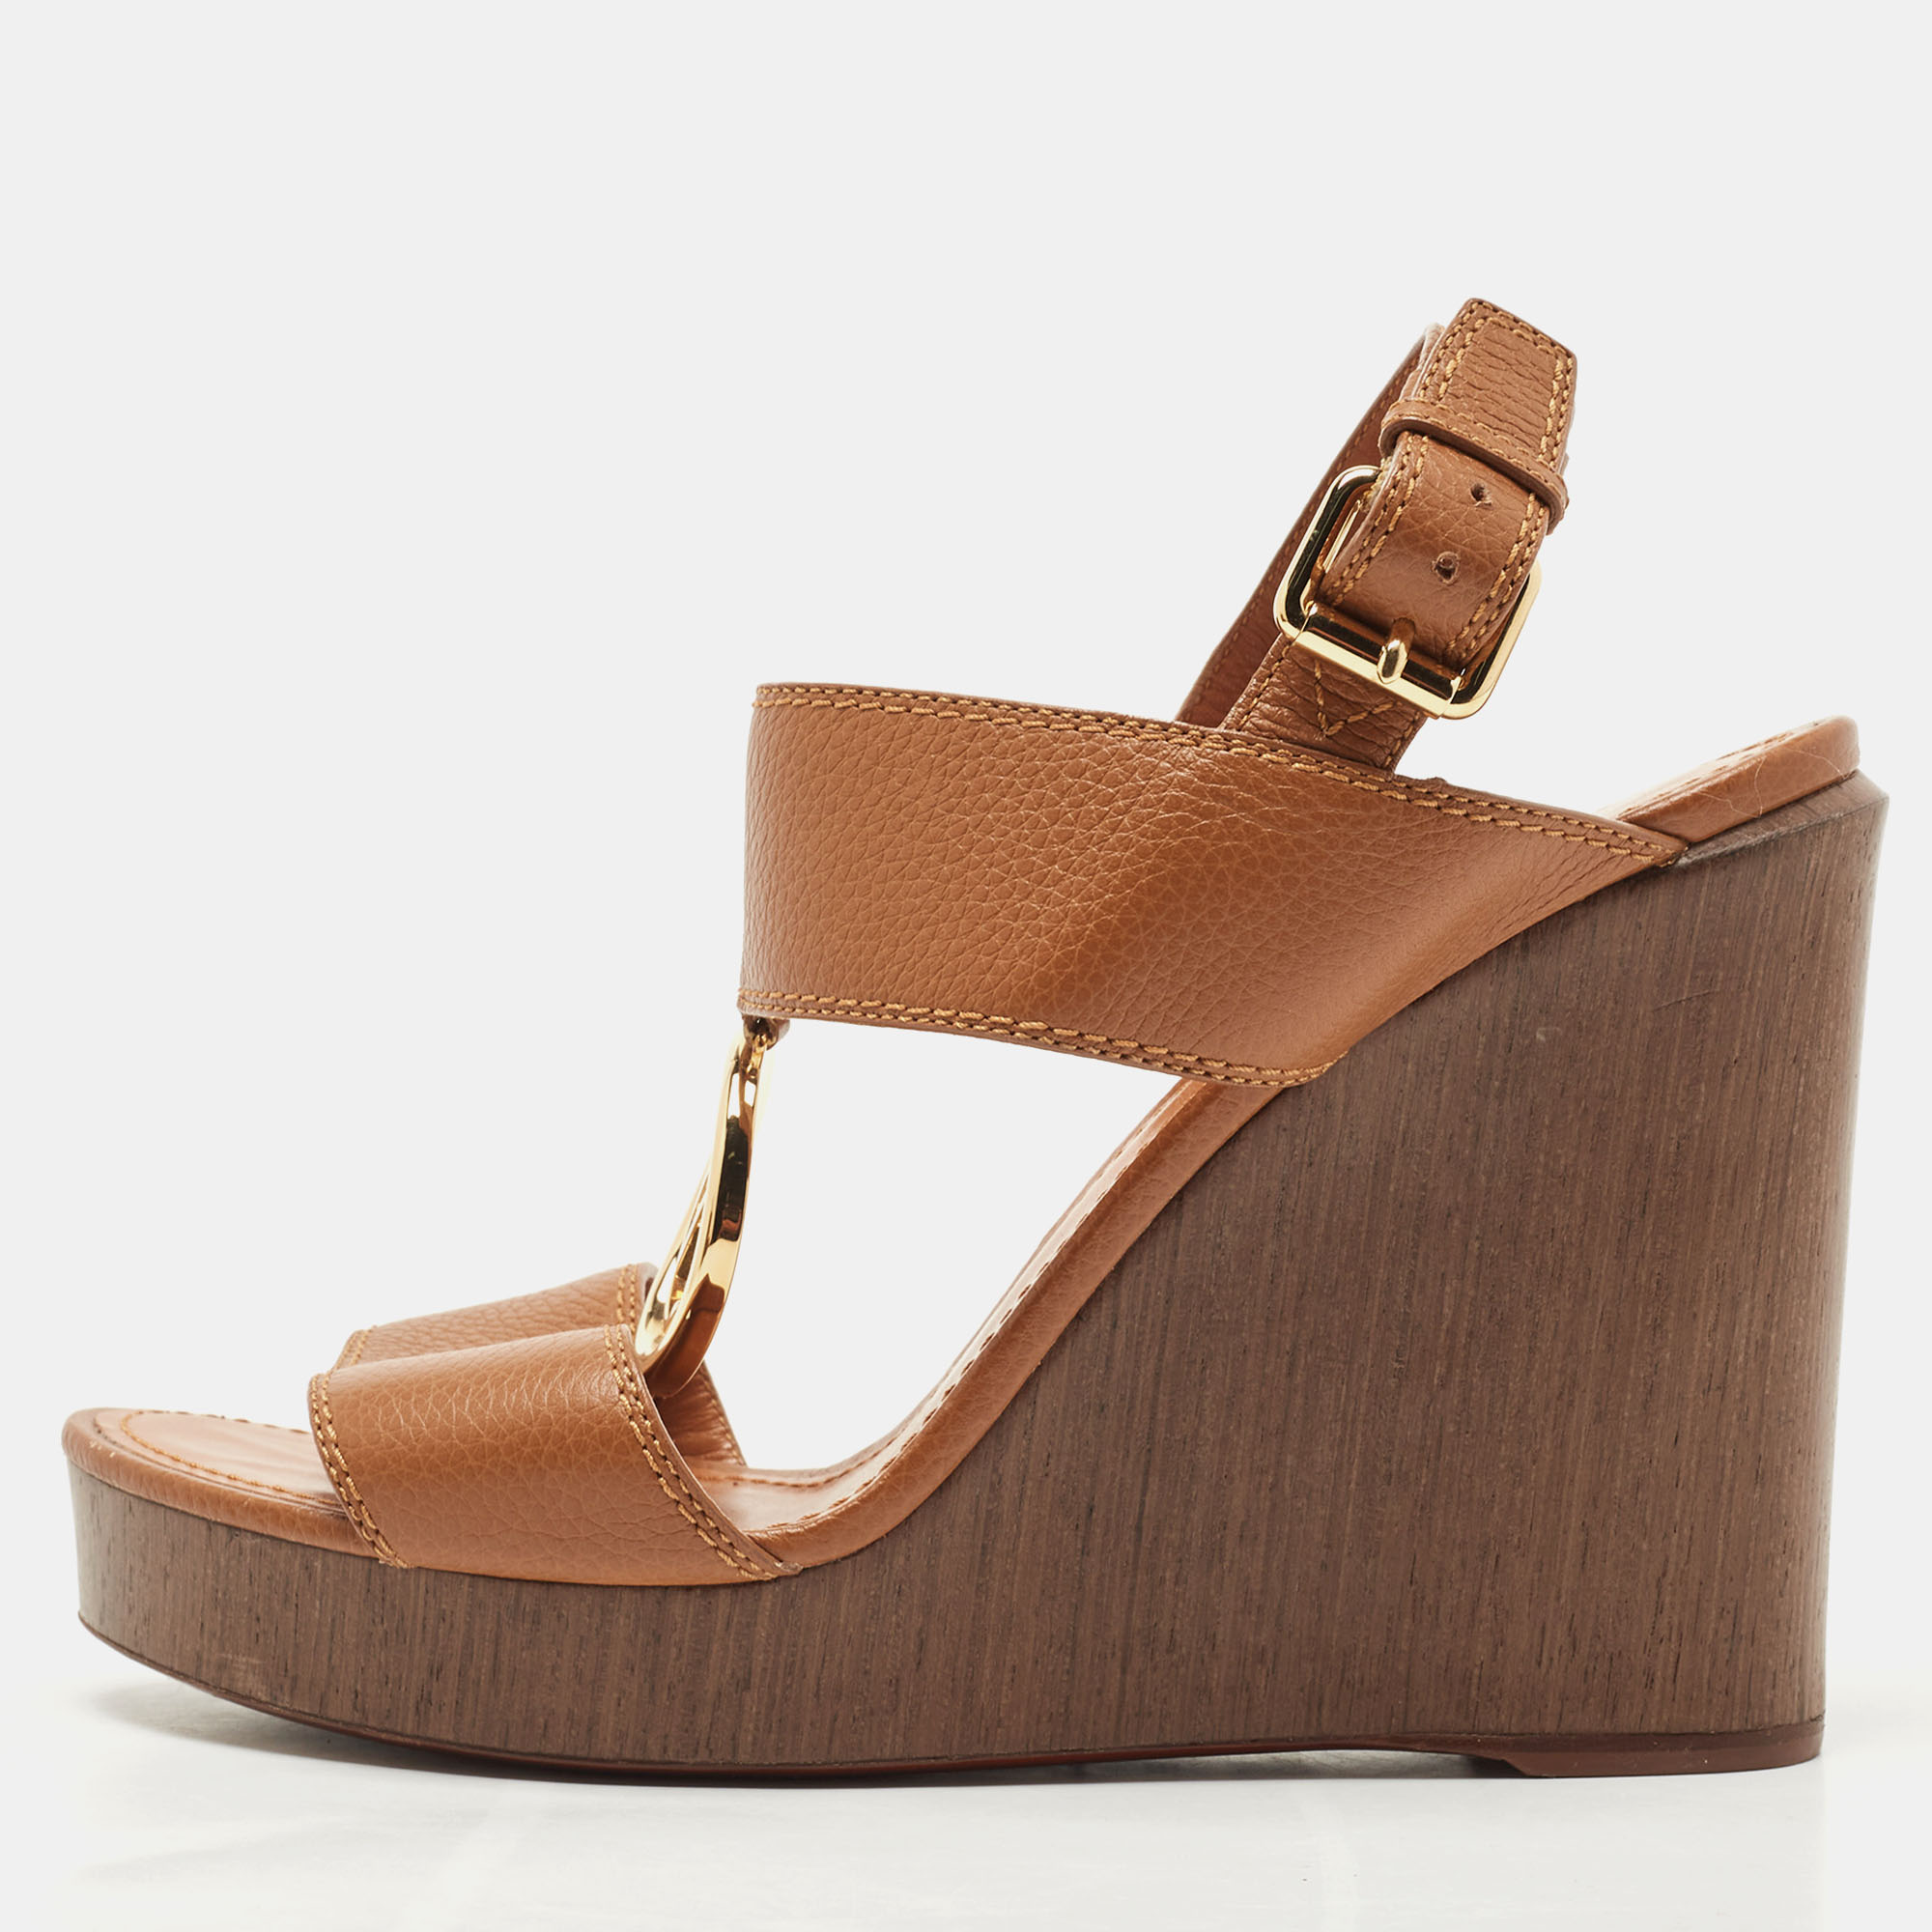 Louis Vuitton Wedge sandals for Women, Black Friday Sale & Deals up to 52%  off